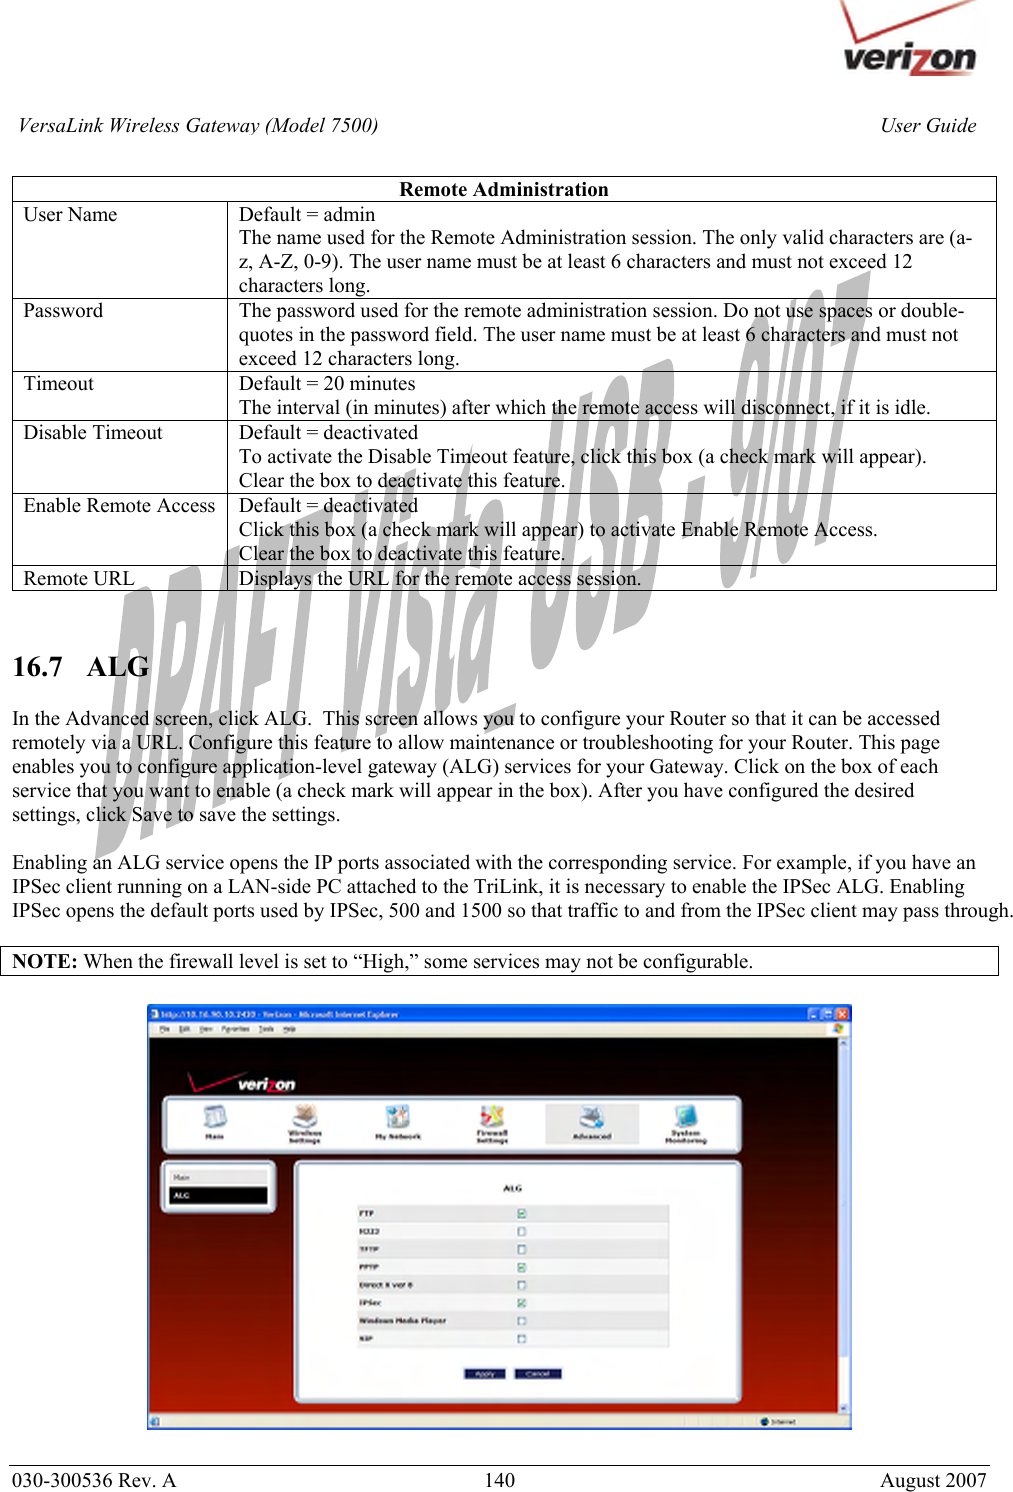       030-300536 Rev. A  140       August 2007 User GuideVersaLink Wireless Gateway (Model 7500) Remote Administration User Name  Default = admin The name used for the Remote Administration session. The only valid characters are (a-z, A-Z, 0-9). The user name must be at least 6 characters and must not exceed 12 characters long. Password  The password used for the remote administration session. Do not use spaces or double-quotes in the password field. The user name must be at least 6 characters and must not exceed 12 characters long. Timeout  Default = 20 minutes The interval (in minutes) after which the remote access will disconnect, if it is idle. Disable Timeout  Default = deactivated To activate the Disable Timeout feature, click this box (a check mark will appear). Clear the box to deactivate this feature. Enable Remote Access  Default = deactivated Click this box (a check mark will appear) to activate Enable Remote Access. Clear the box to deactivate this feature. Remote URL  Displays the URL for the remote access session.   16.7   ALG  In the Advanced screen, click ALG.  This screen allows you to configure your Router so that it can be accessed remotely via a URL. Configure this feature to allow maintenance or troubleshooting for your Router. This page enables you to configure application-level gateway (ALG) services for your Gateway. Click on the box of each service that you want to enable (a check mark will appear in the box). After you have configured the desired settings, click Save to save the settings.   Enabling an ALG service opens the IP ports associated with the corresponding service. For example, if you have an IPSec client running on a LAN-side PC attached to the TriLink, it is necessary to enable the IPSec ALG. Enabling IPSec opens the default ports used by IPSec, 500 and 1500 so that traffic to and from the IPSec client may pass through.  NOTE: When the firewall level is set to “High,” some services may not be configurable.    